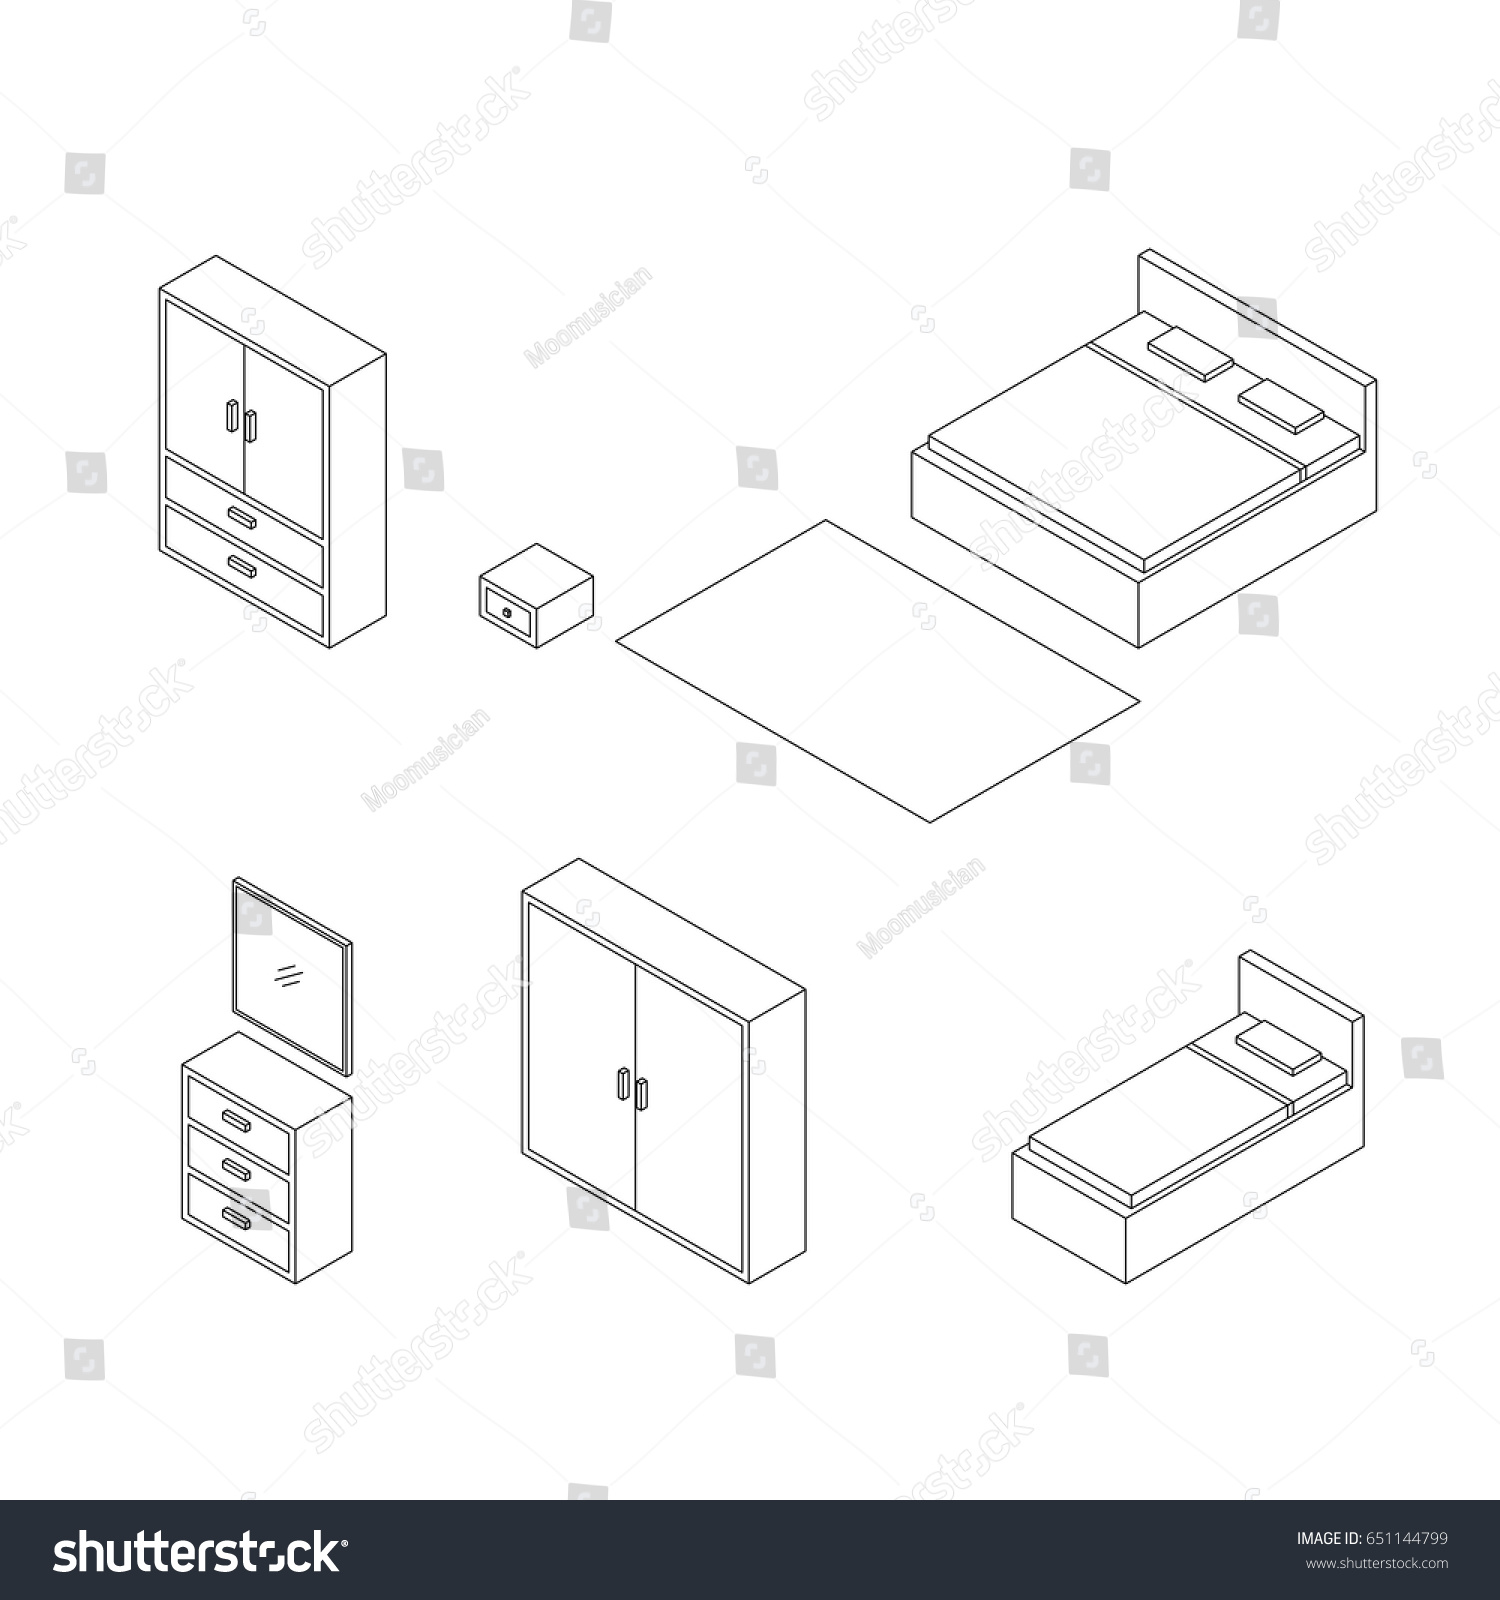 Set Bedroom Furniture Outline Isometric Drawing Stock Vector